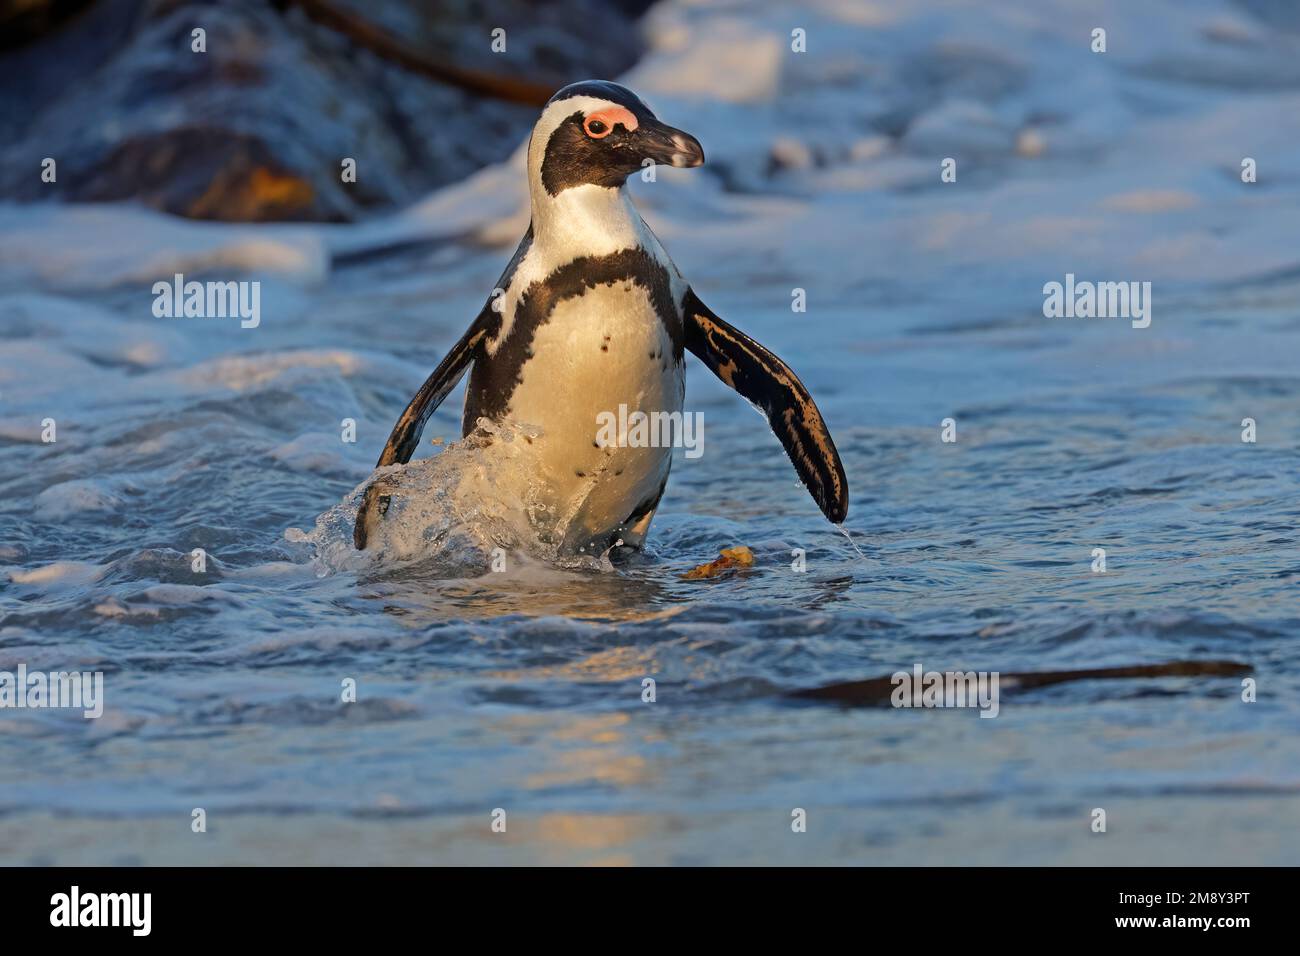 An African penguin (Spheniscus demersus) in shallow coastal water, South Africa Stock Photo